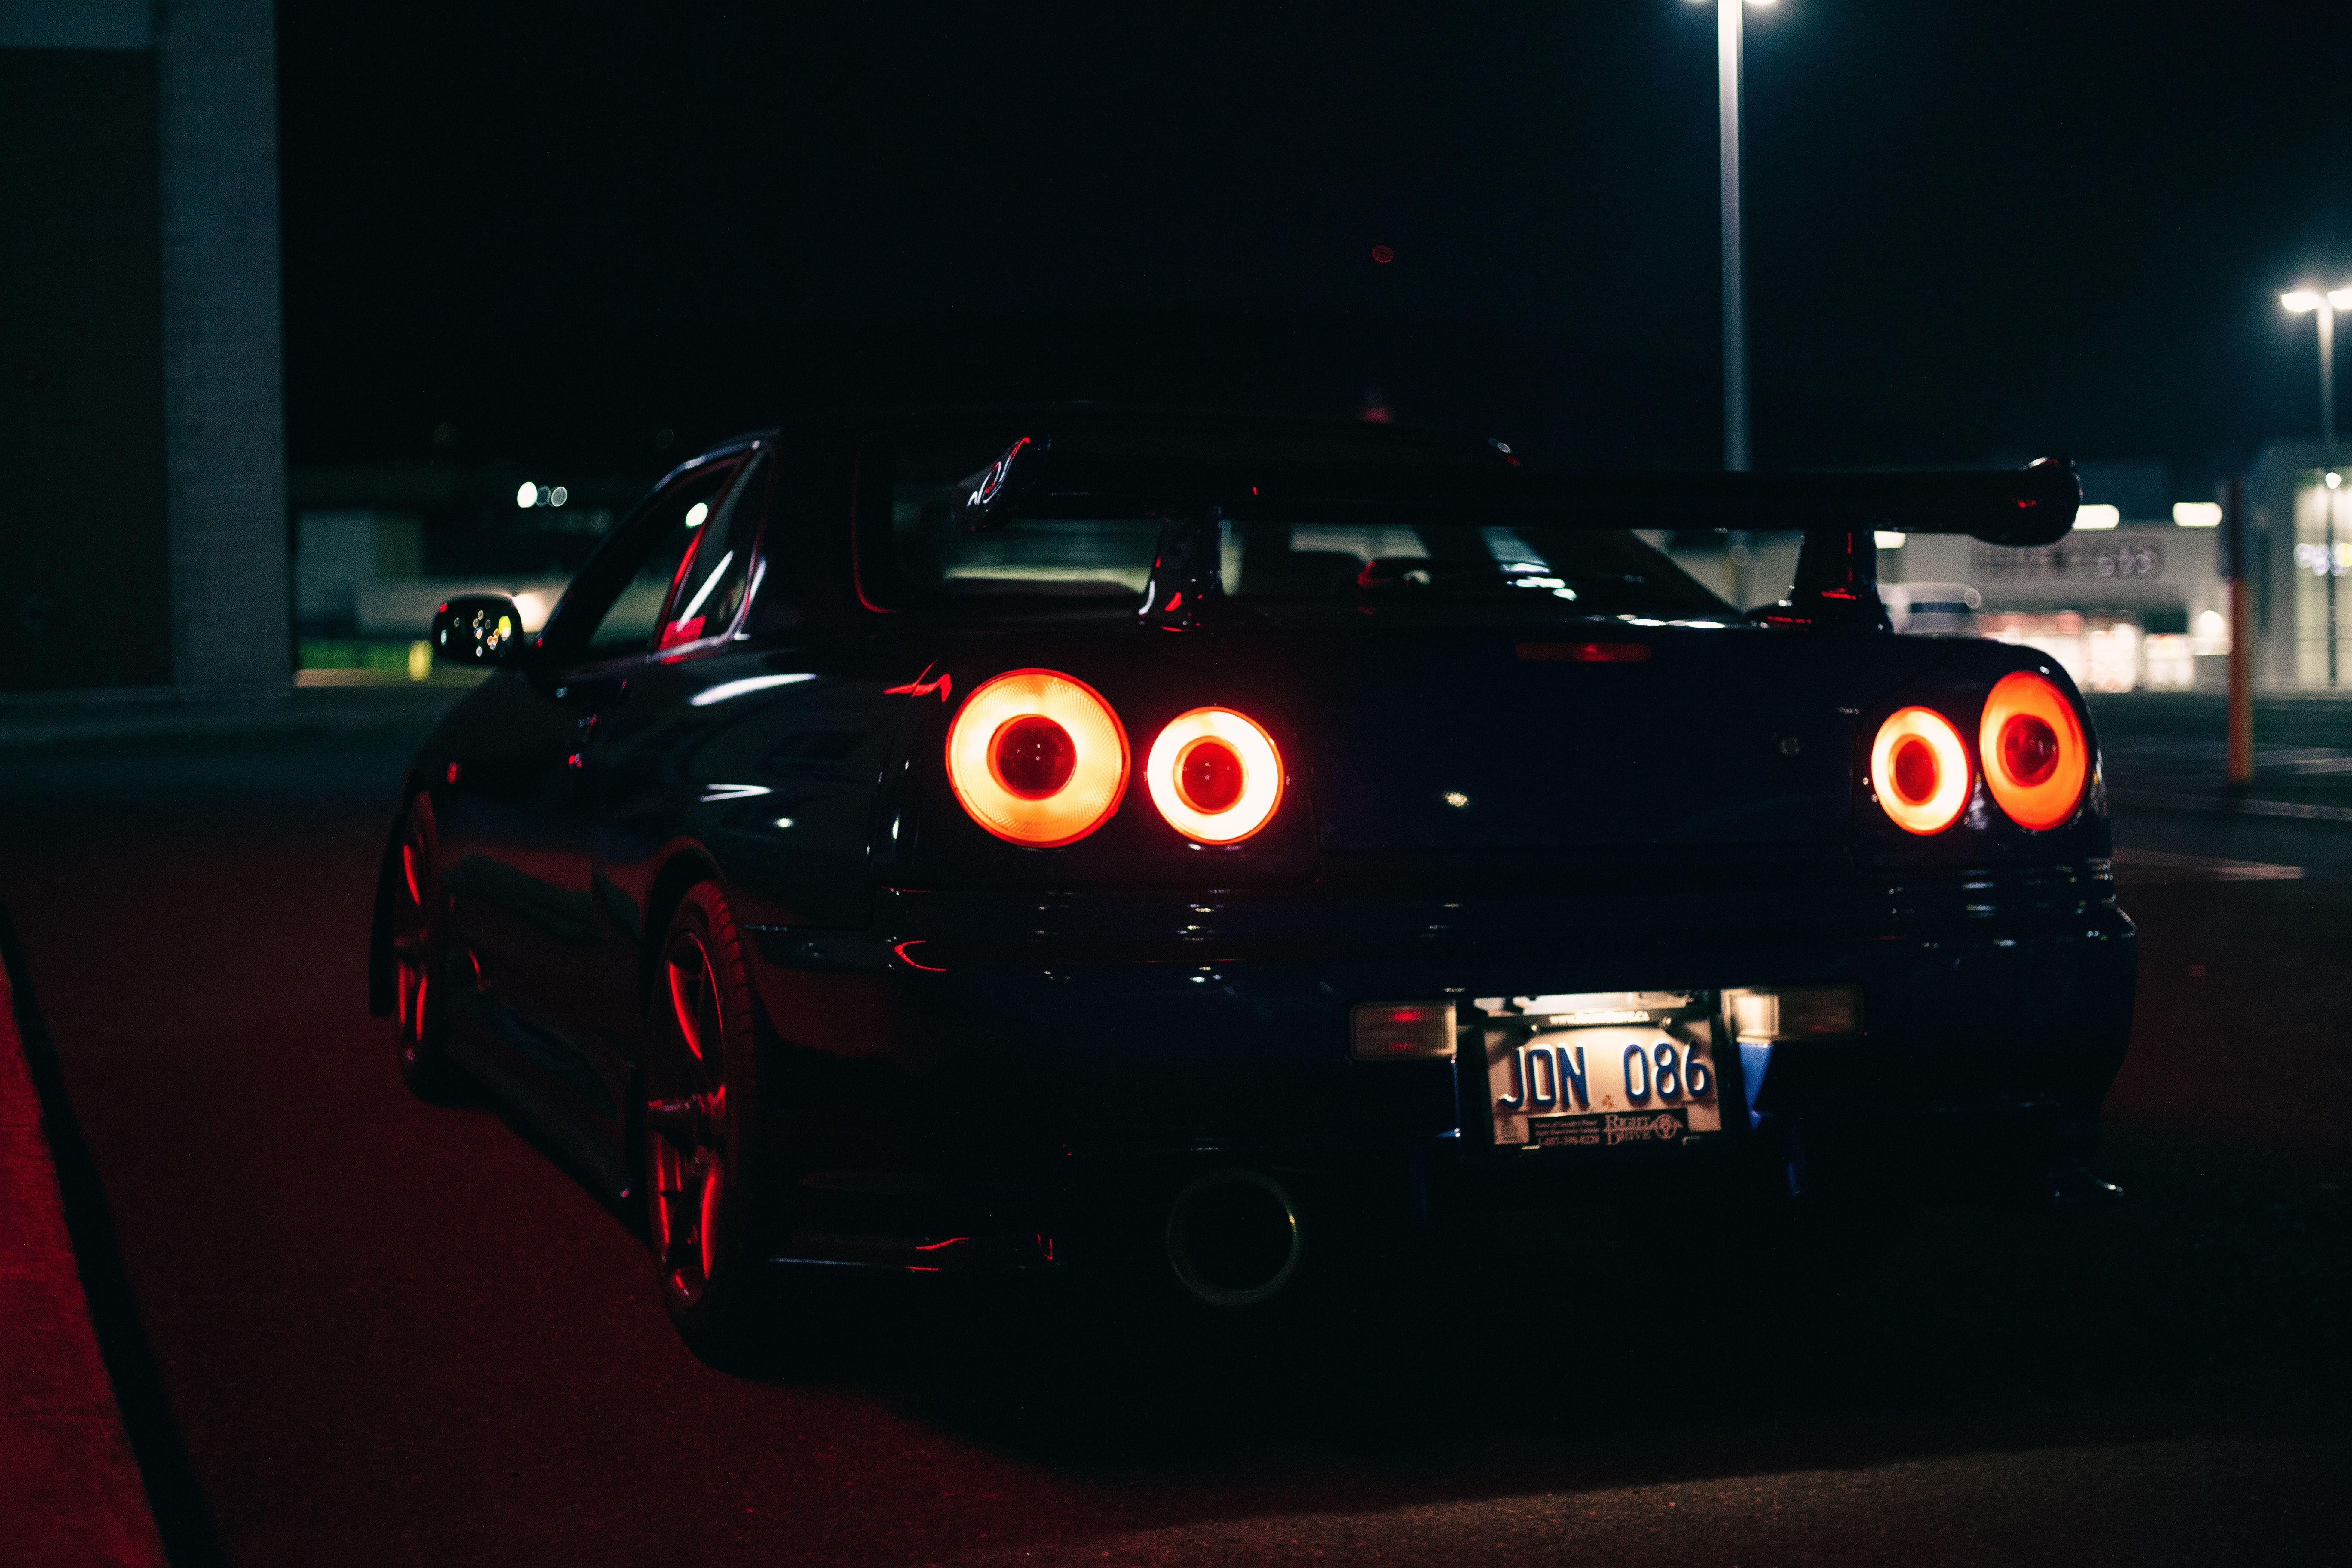 A black sports car with red lights parked in a parking lot at night. - Nissan Skyline